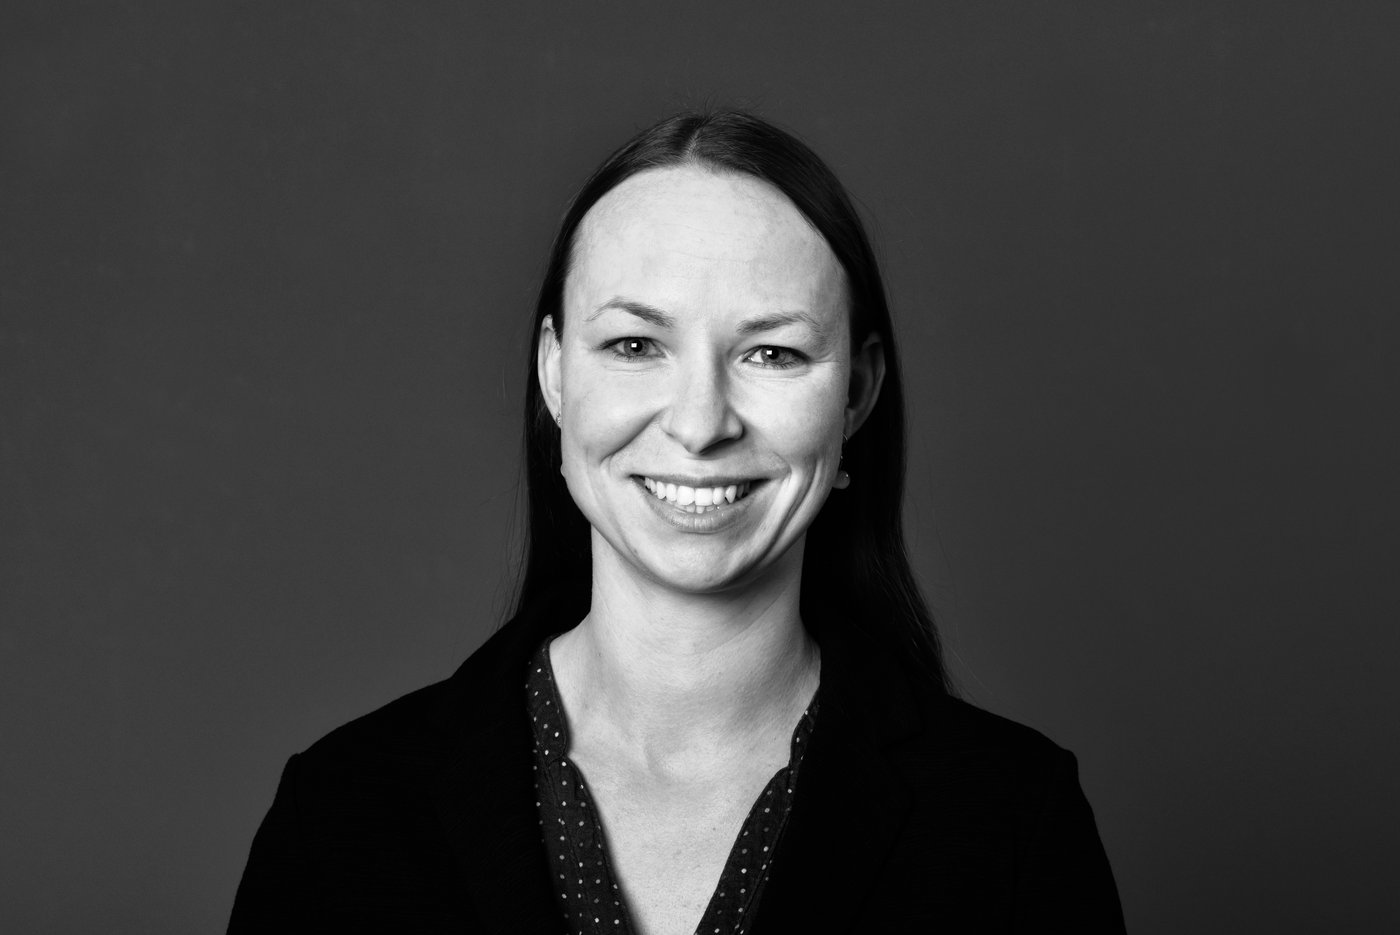 The black-and-white portrait shows a friendly smiling researcher.